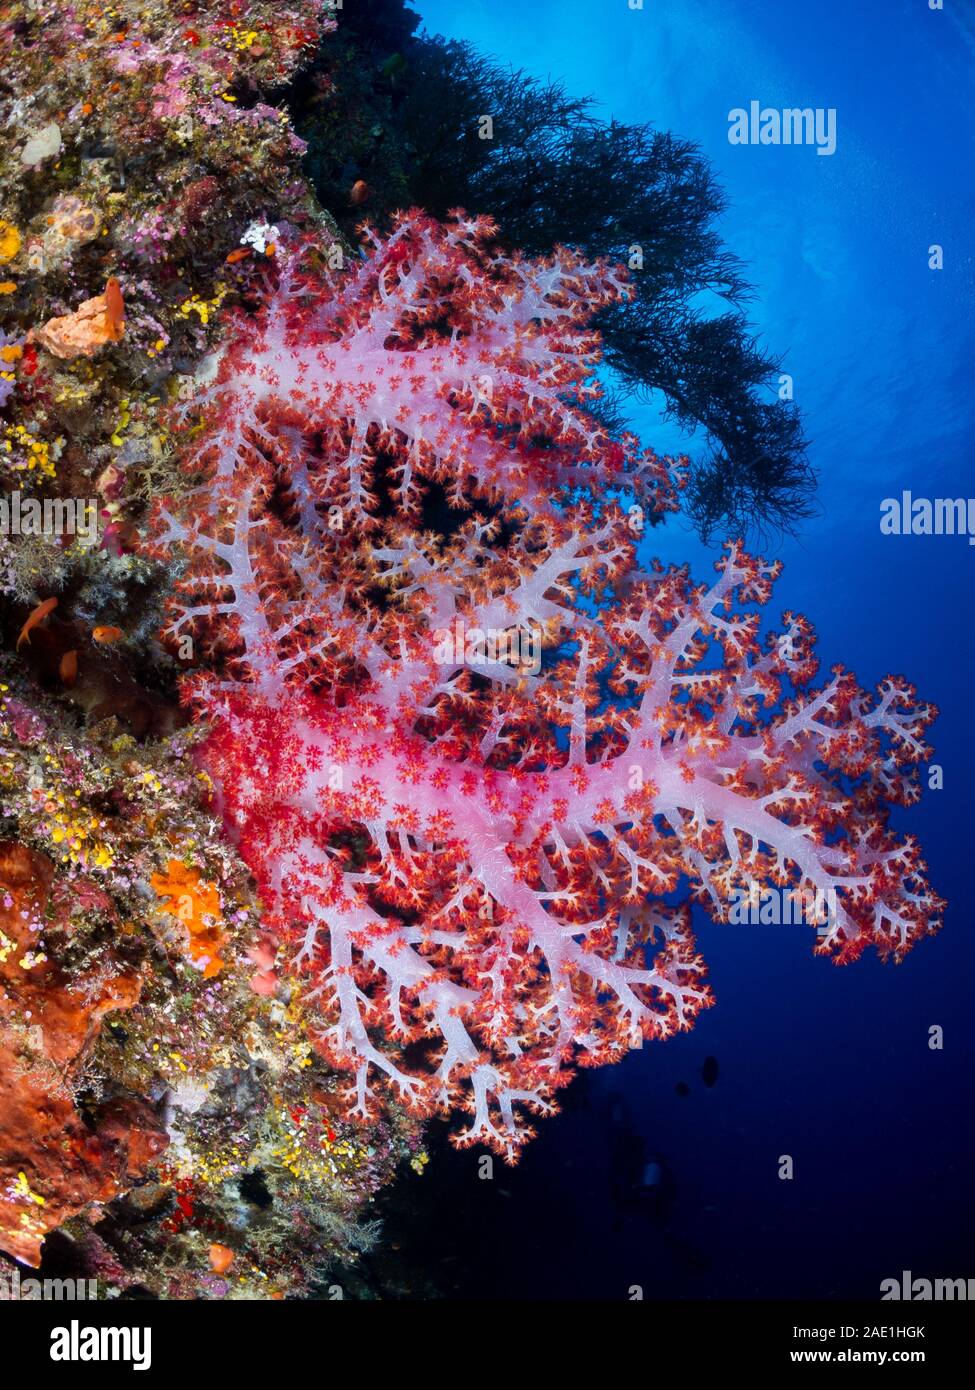 Coral Tree, Dendronephthya sp, Mabul, Malaisie Banque D'Images